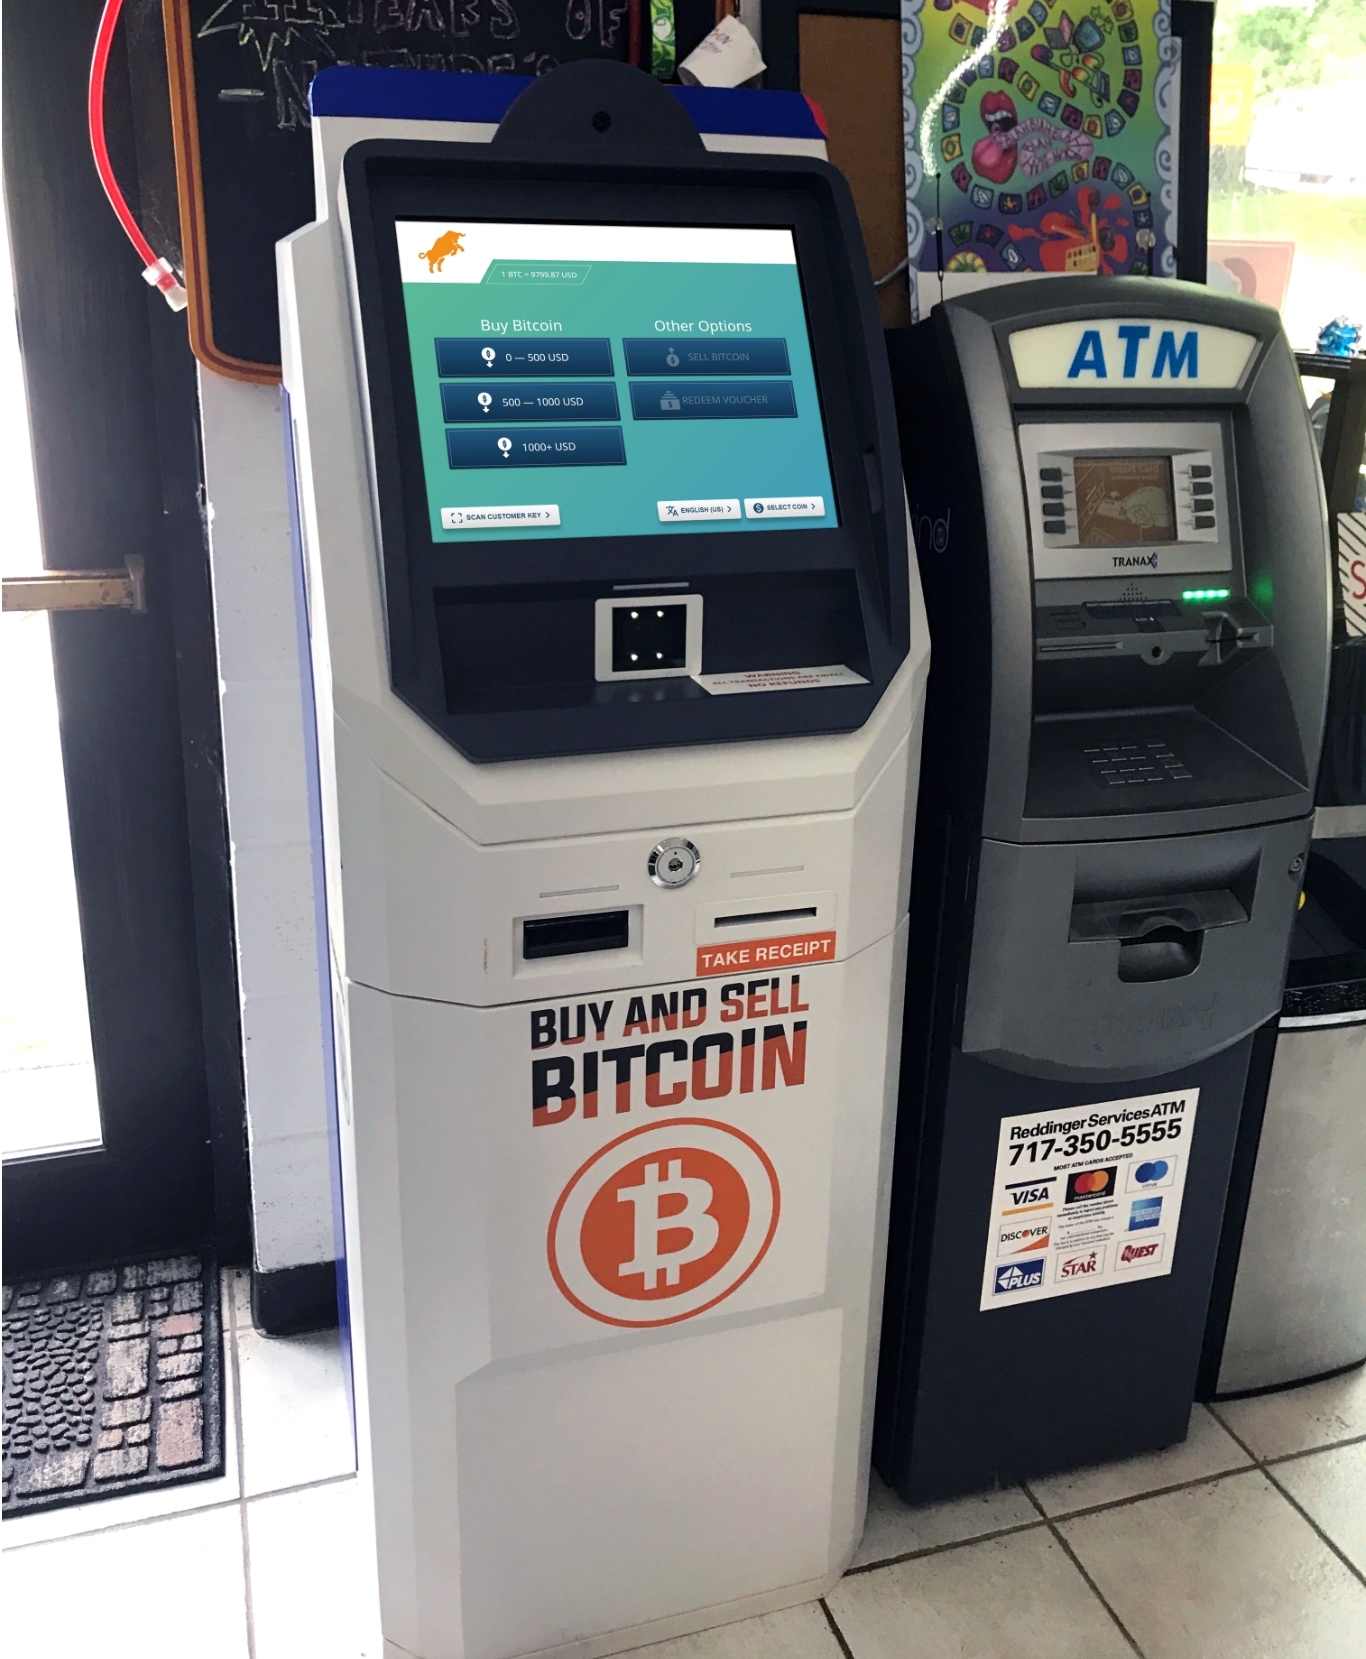 Bitcoin ATM in Middletown allows you to buy bitcoin or sell bitcoin by Satoshi kiosks